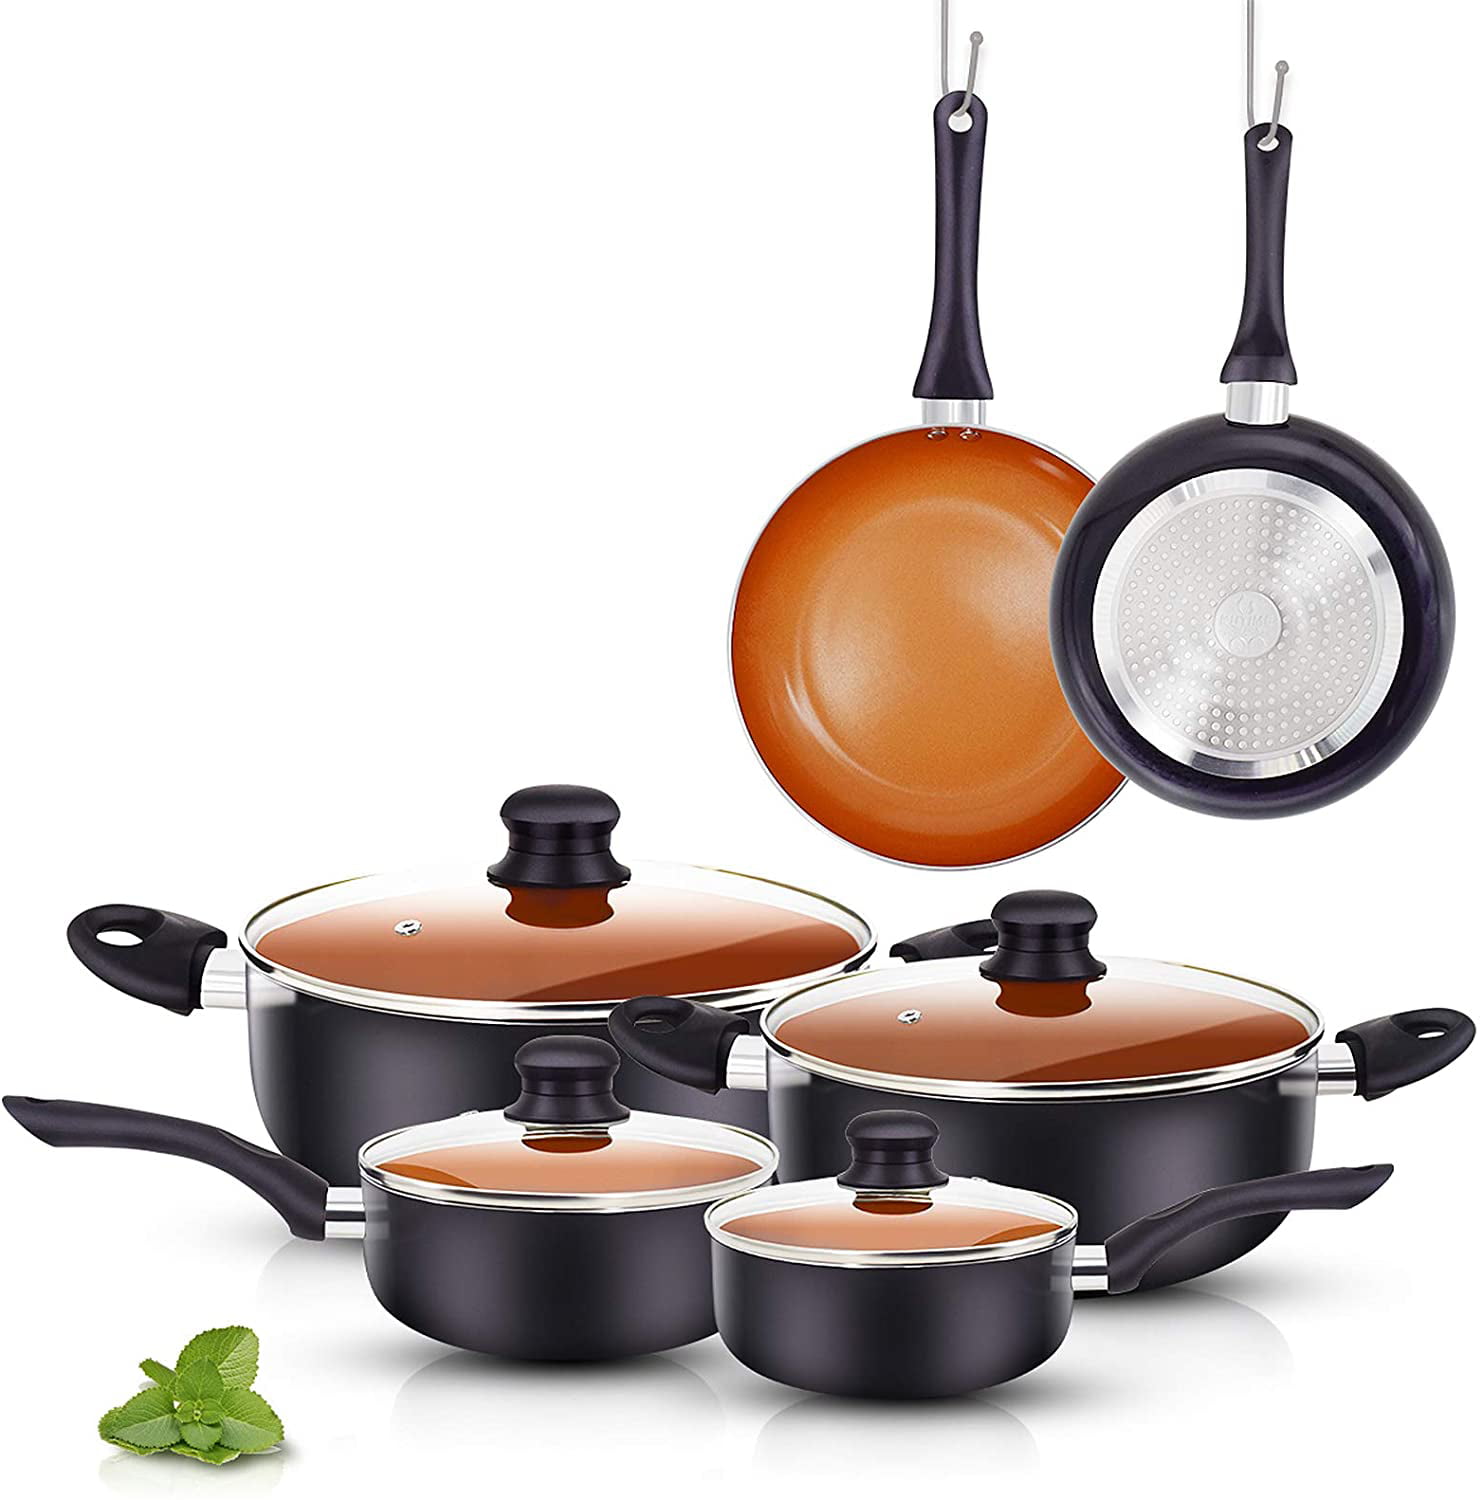 MICHELANGELO Pots and Pans Set 15 Piece with with Non- toxic Stone-Derived  Interior, Nonstick Kitchen Cookware Set with Utensils